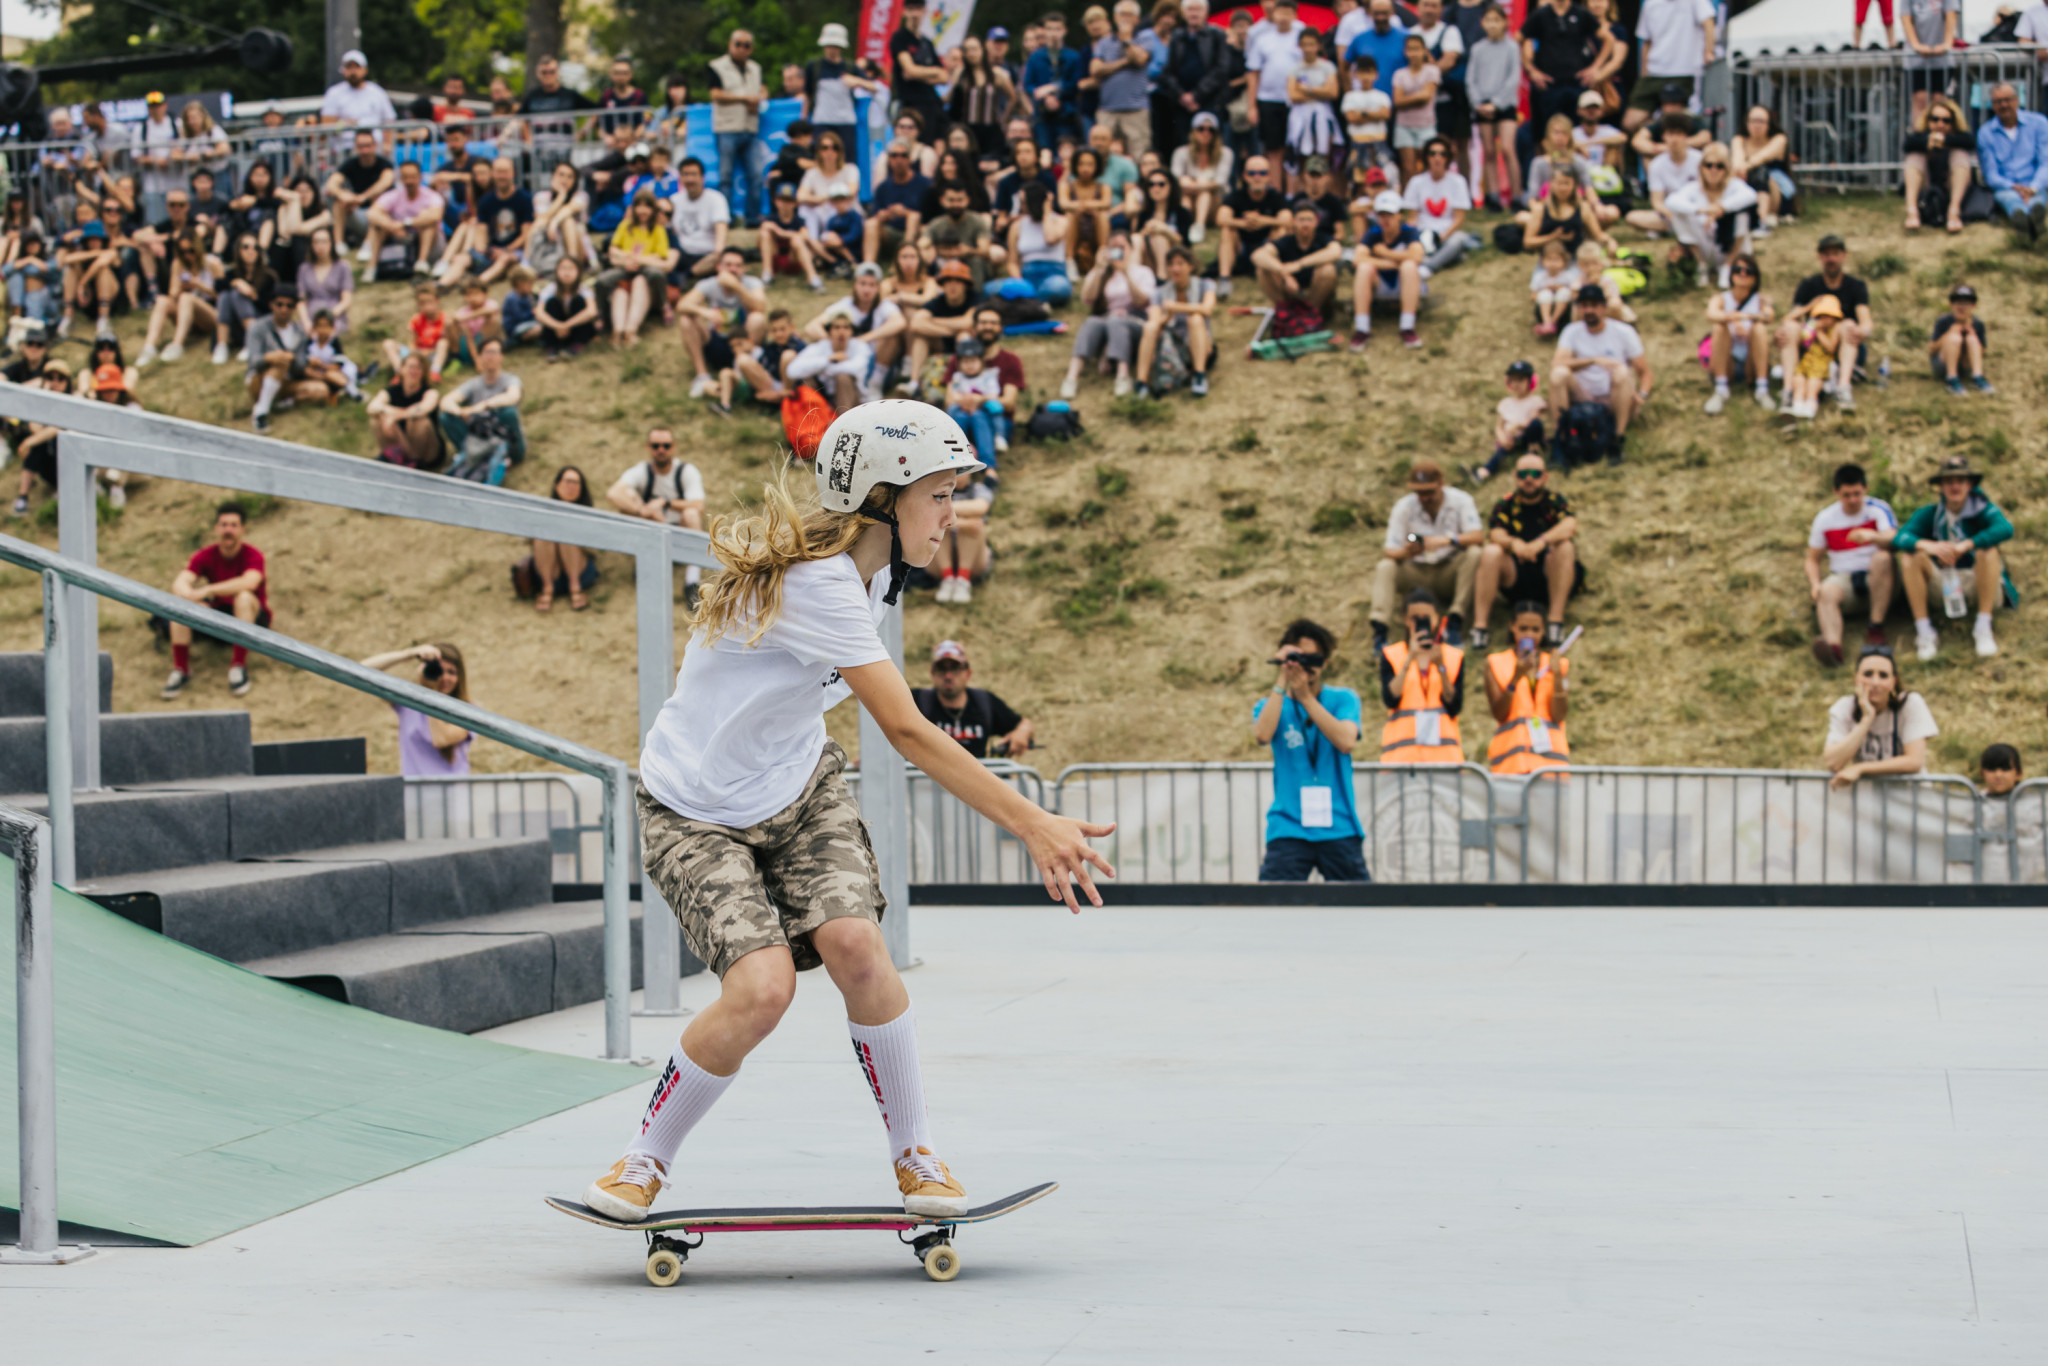 The 13-year-old scored 4.27 points, falling short of Hym's 5.35 at the FISE Street Park ©Hurricane - FISE